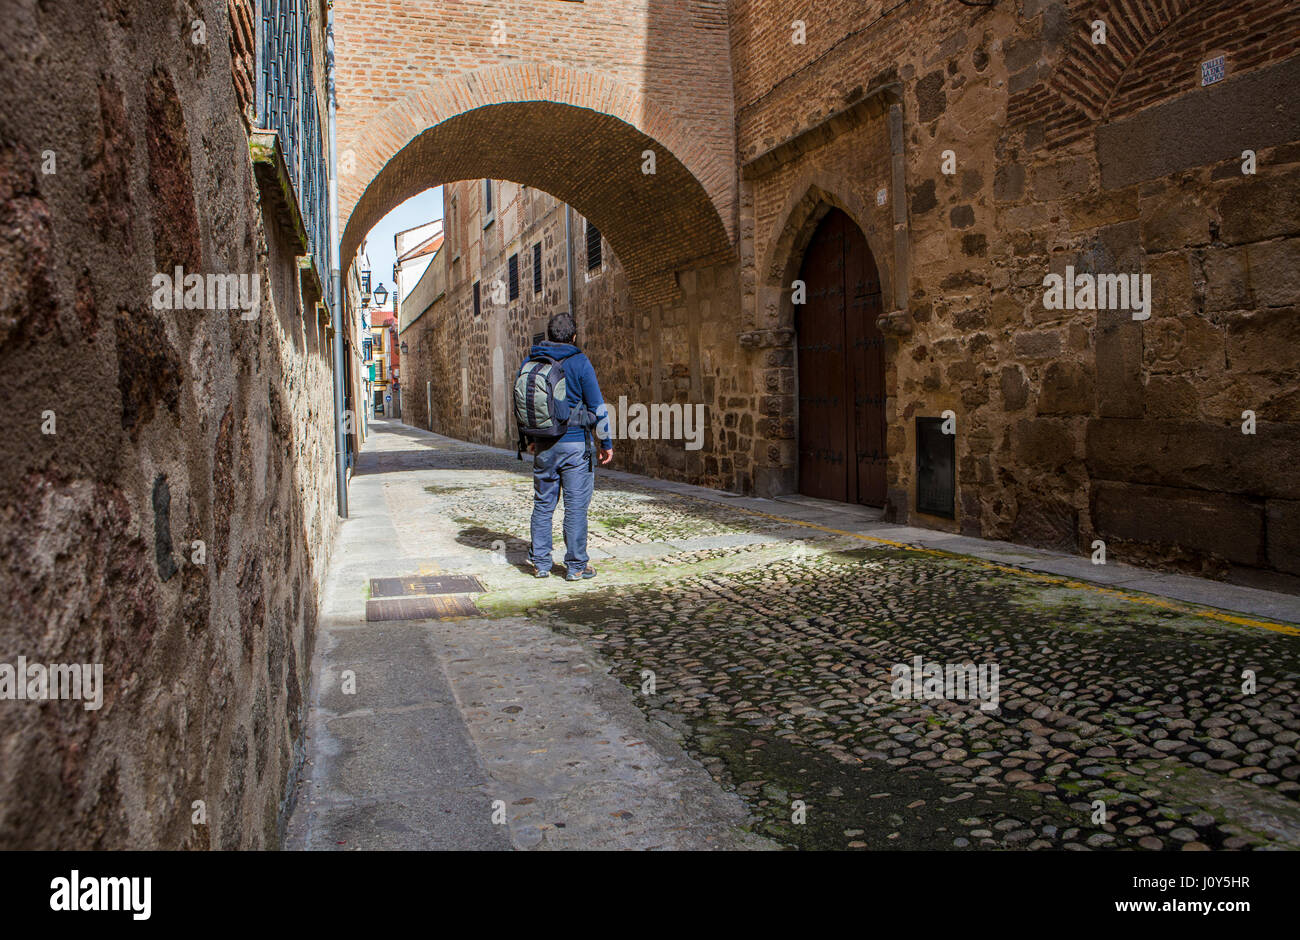 Visitor walking by arched medieval street at Plasencia Old town, Caceres, Extremadura, Spain Stock Photo